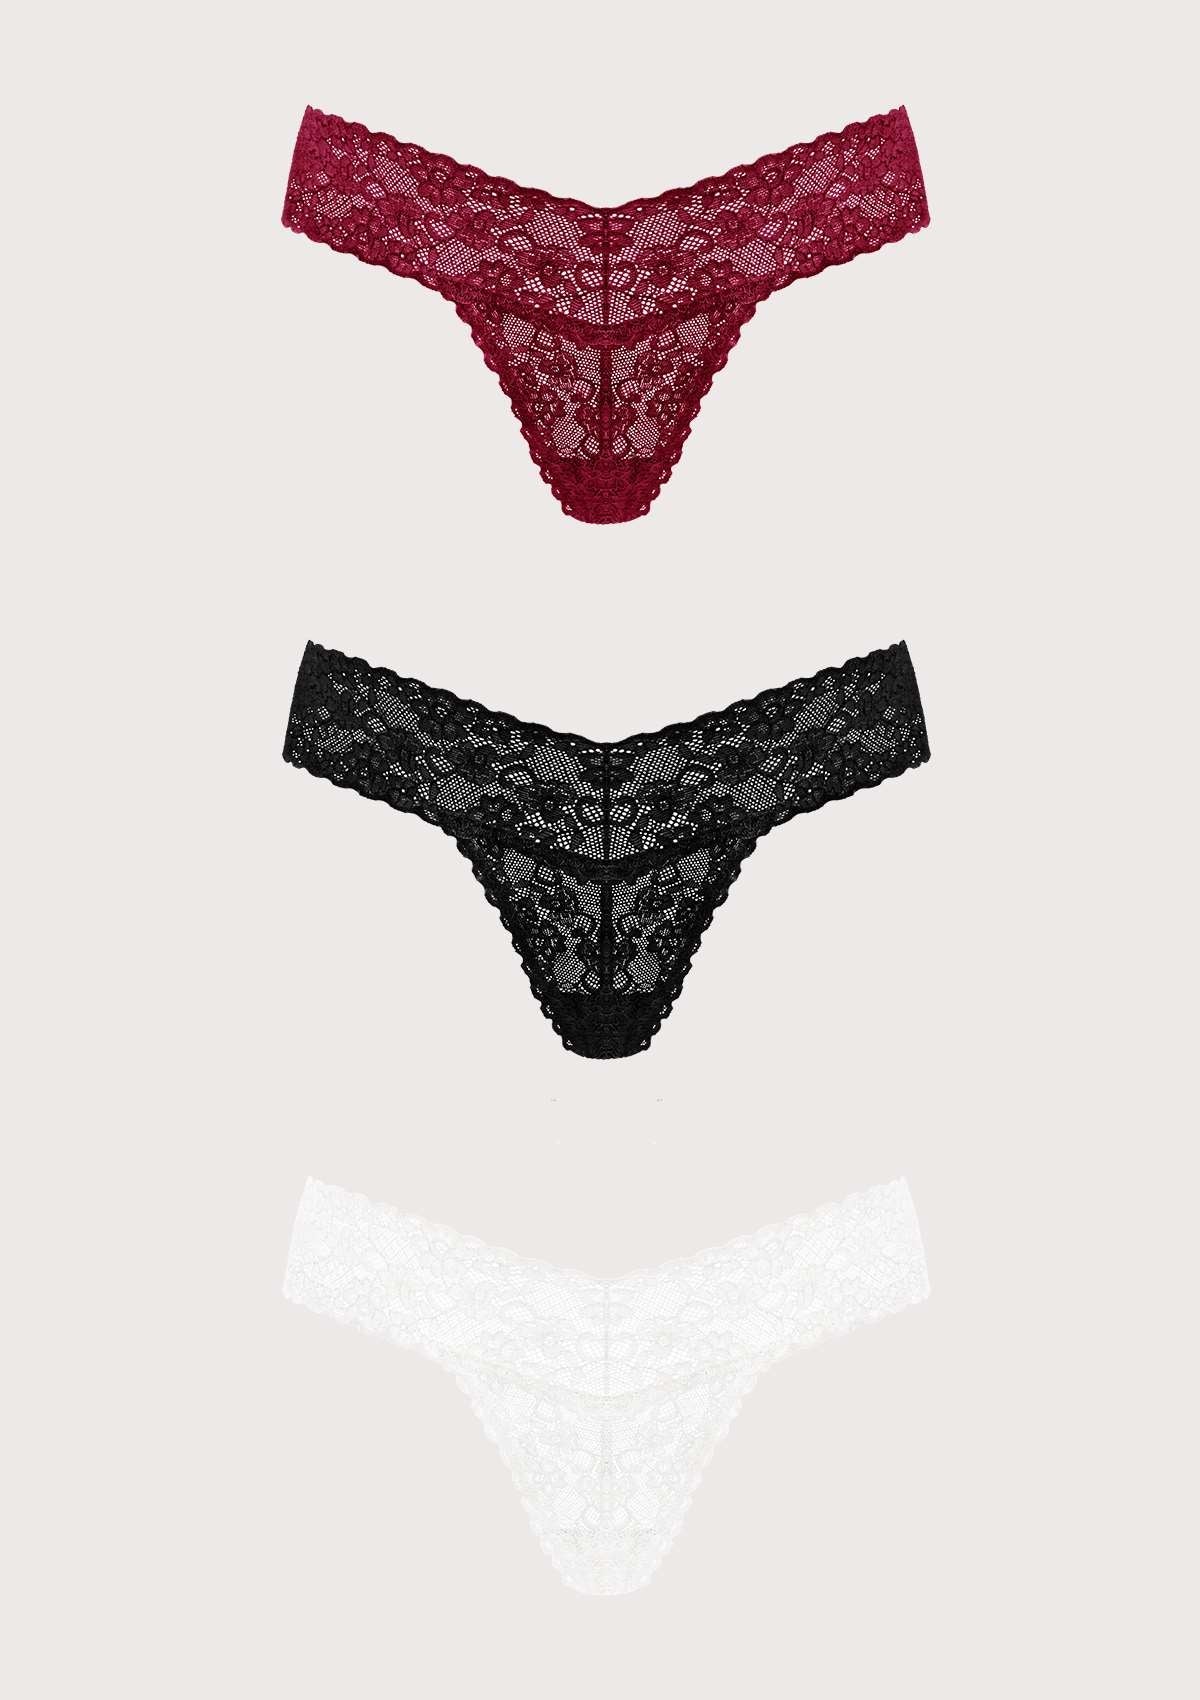 HSIA Soft Sexy Lace Cheeky Thong Underwear 3 Pack - XL / Black+Burgundy+White